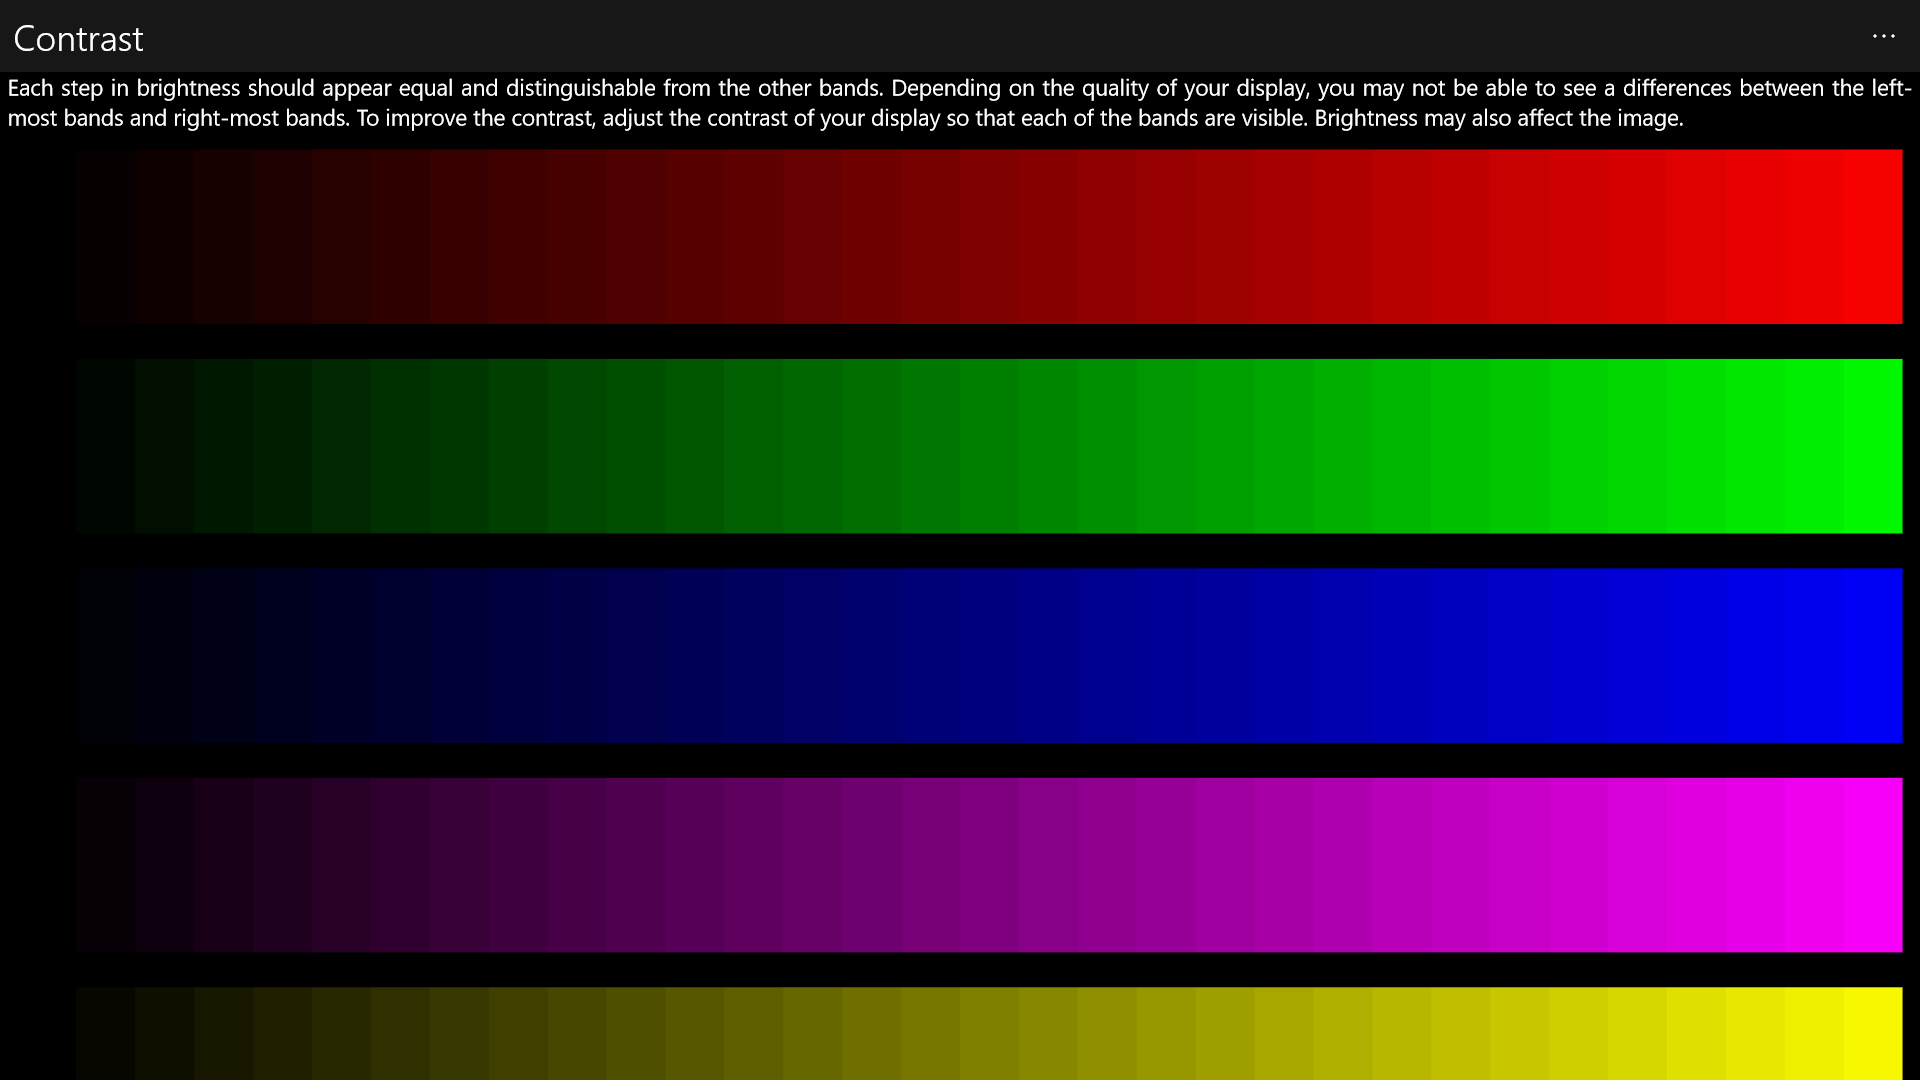 The contrast page shows you several bands of colors ranging from black to their brightest value.